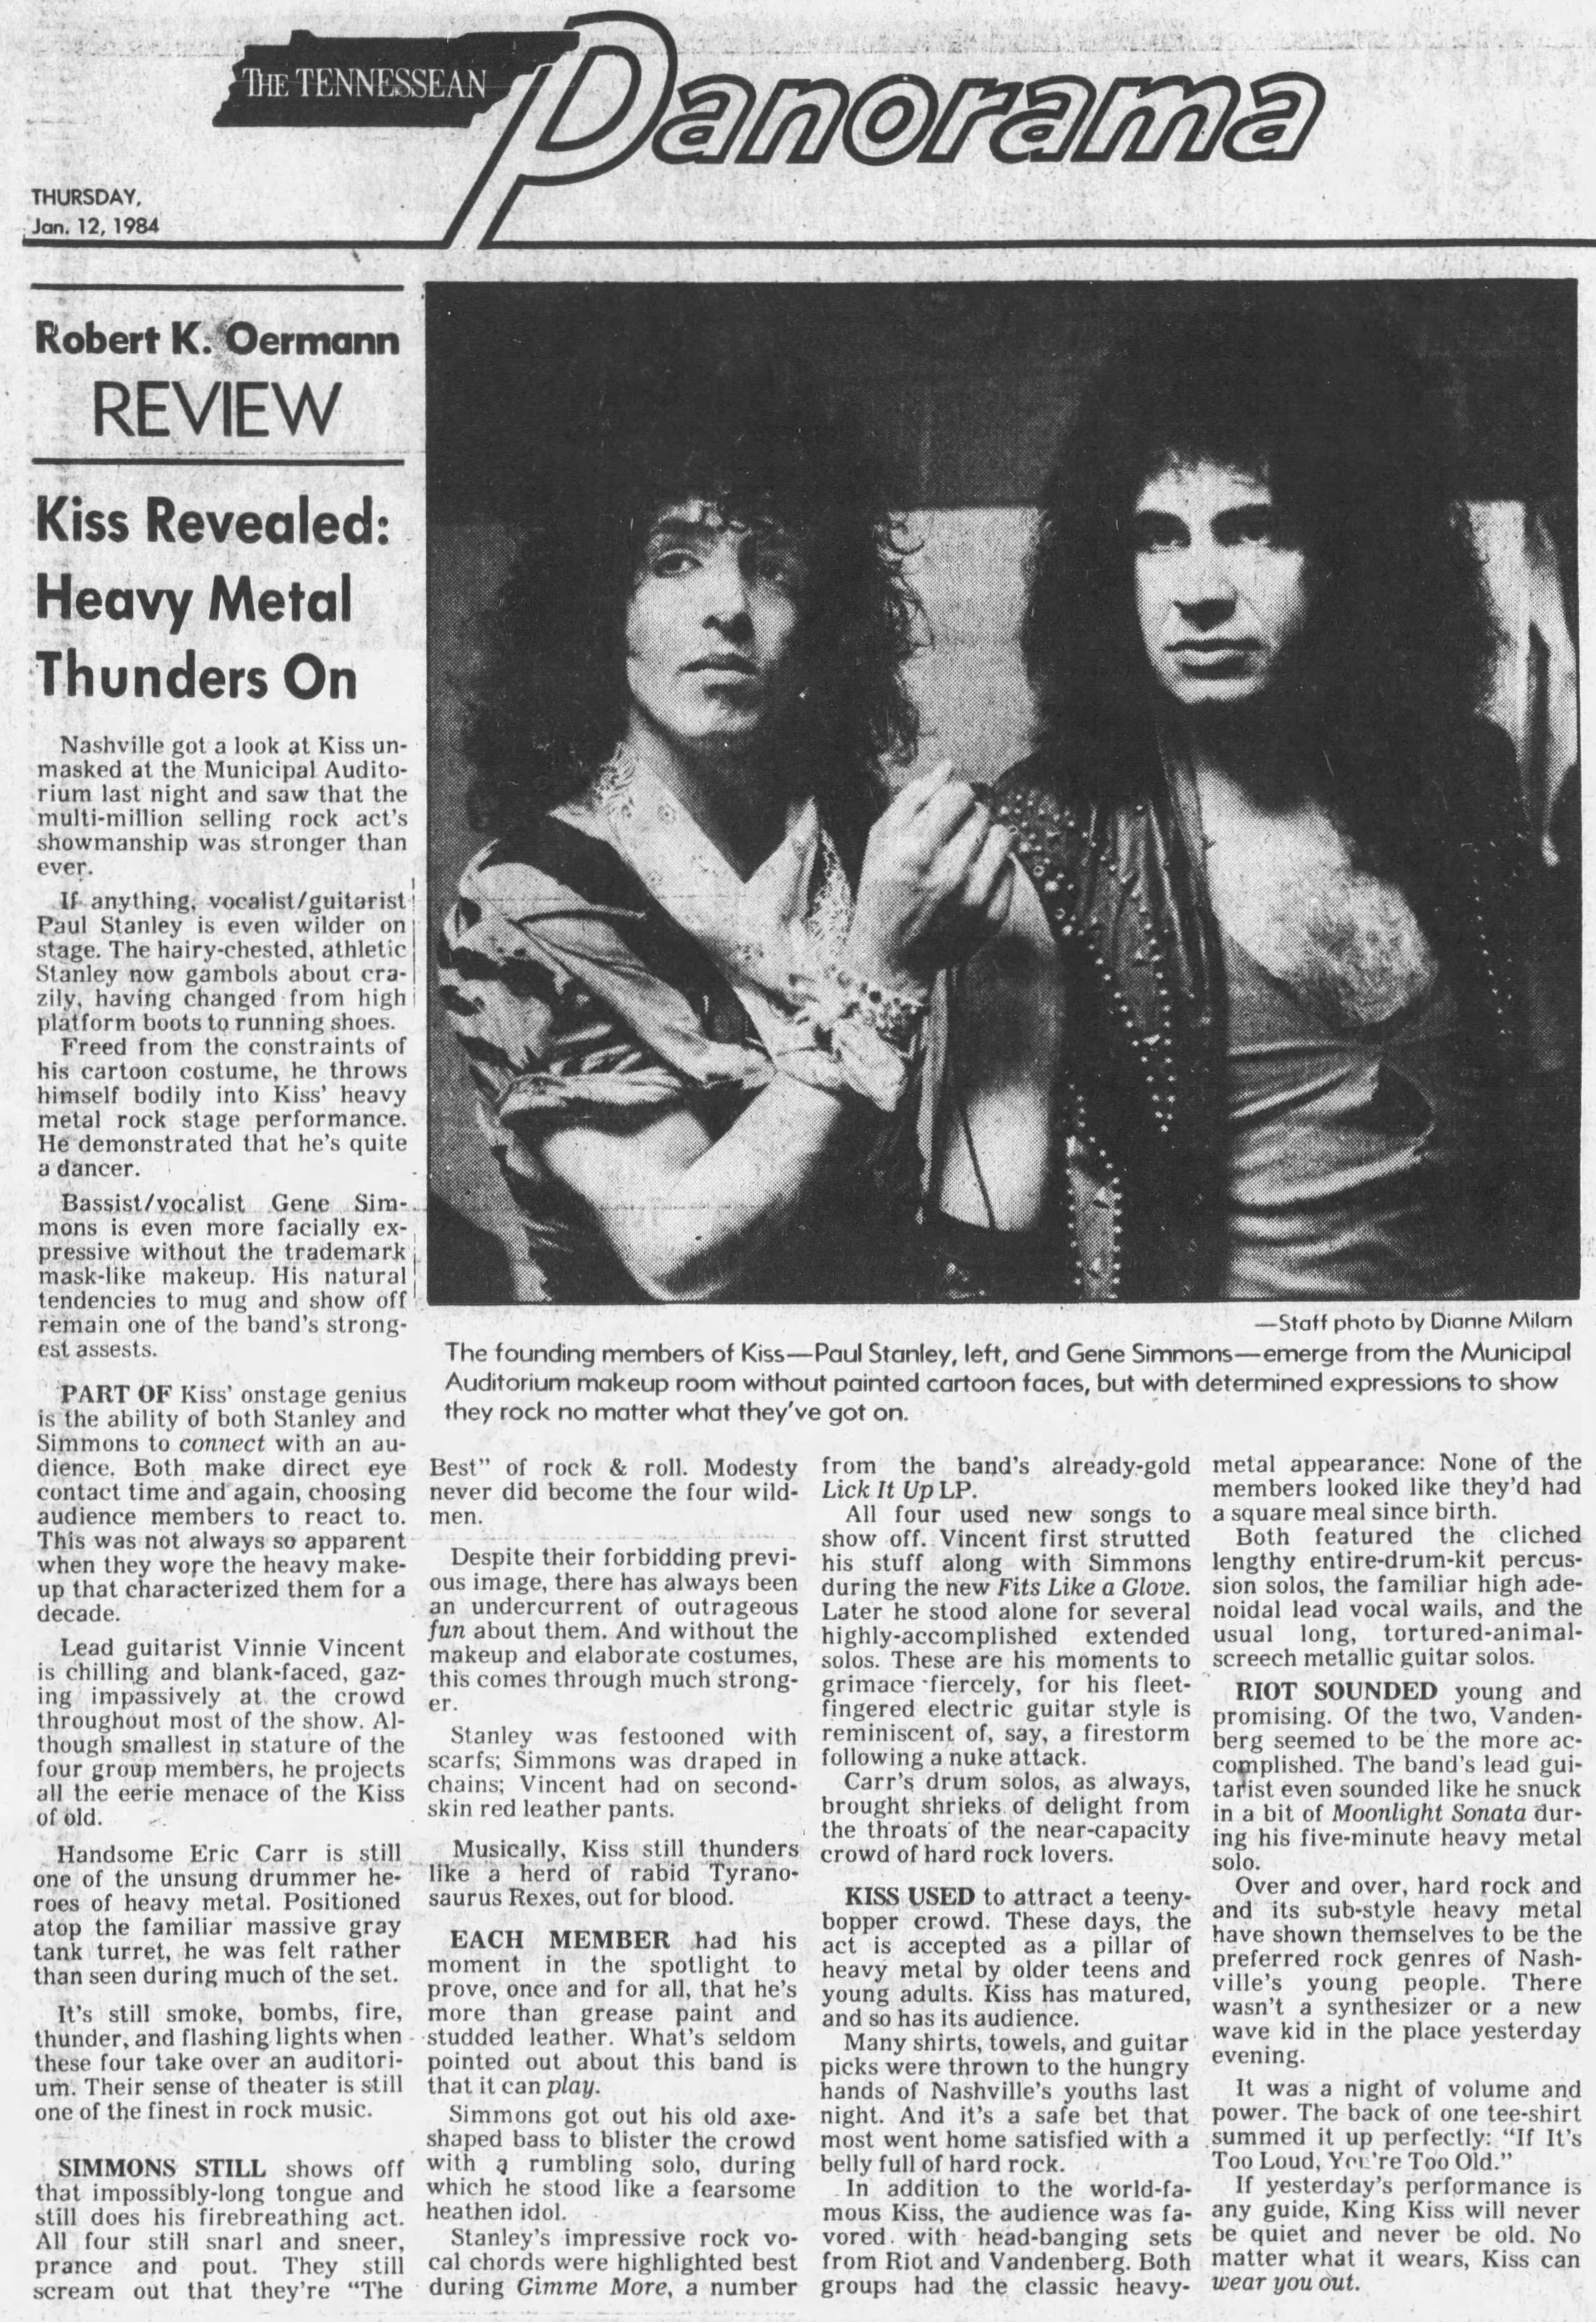 Review from Nashville, TN, USA 11 January 1984 show